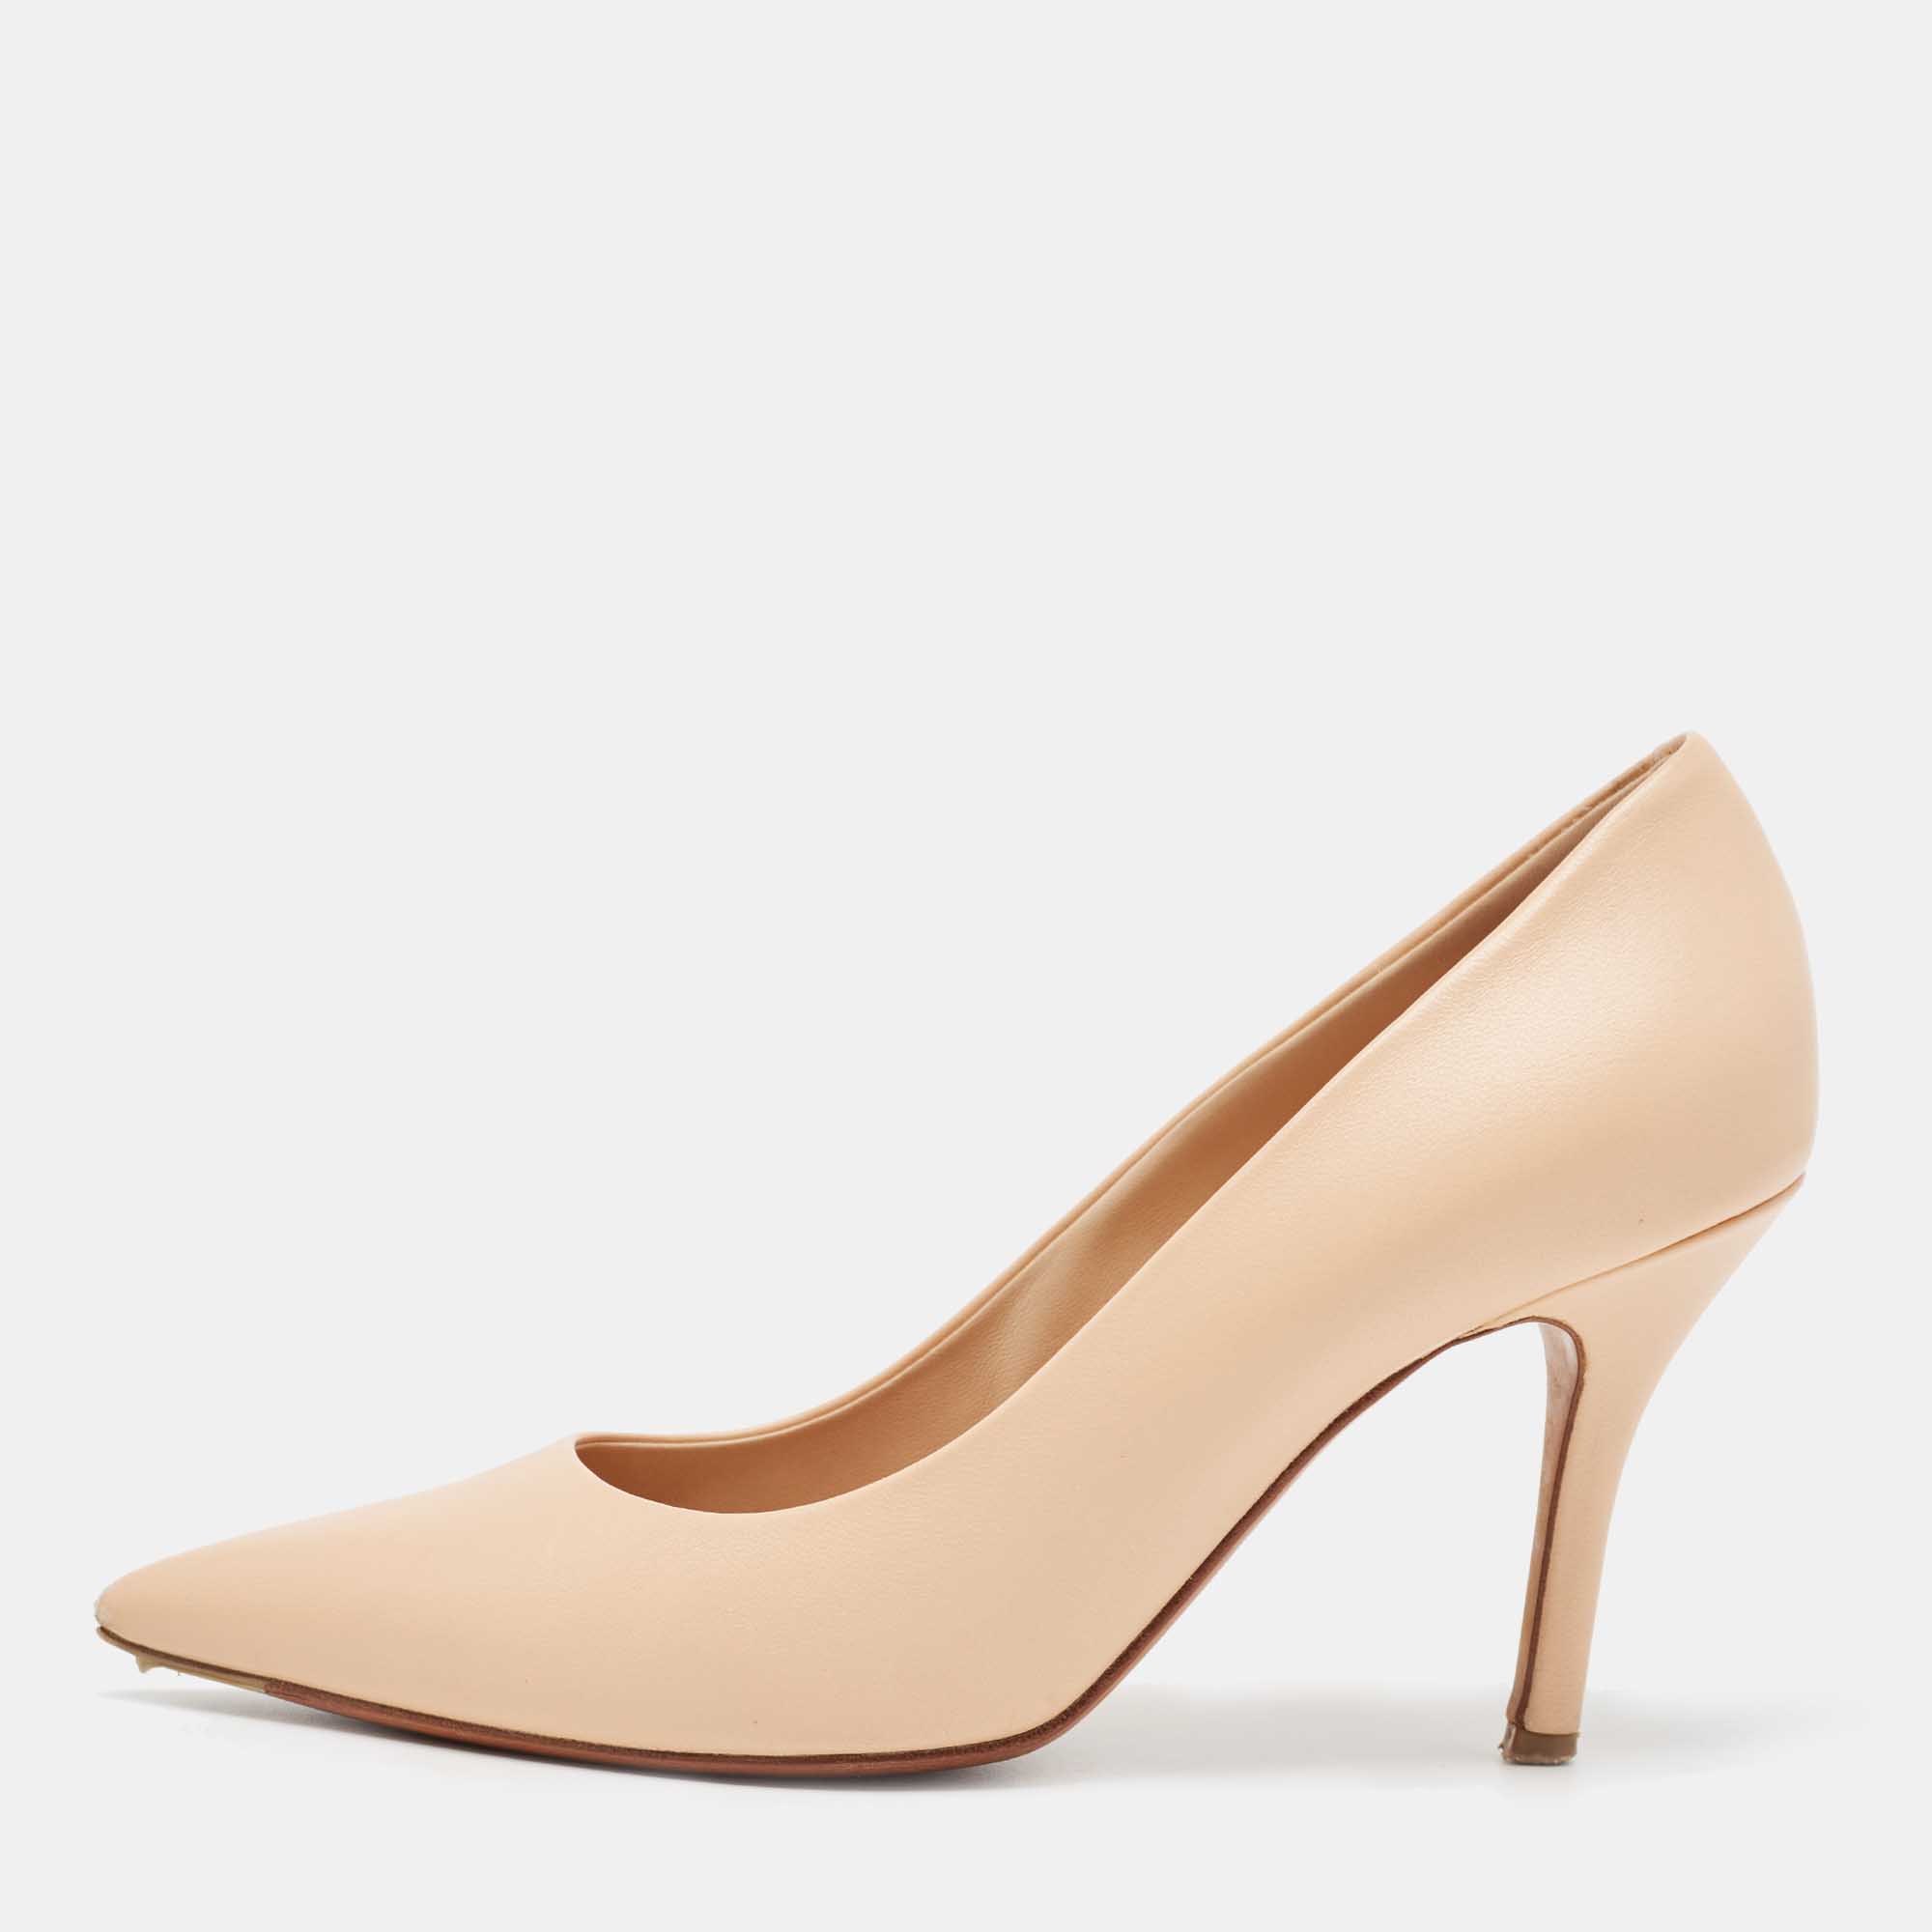 Celine Beige Leather Pointed Toe Pumps Size 37